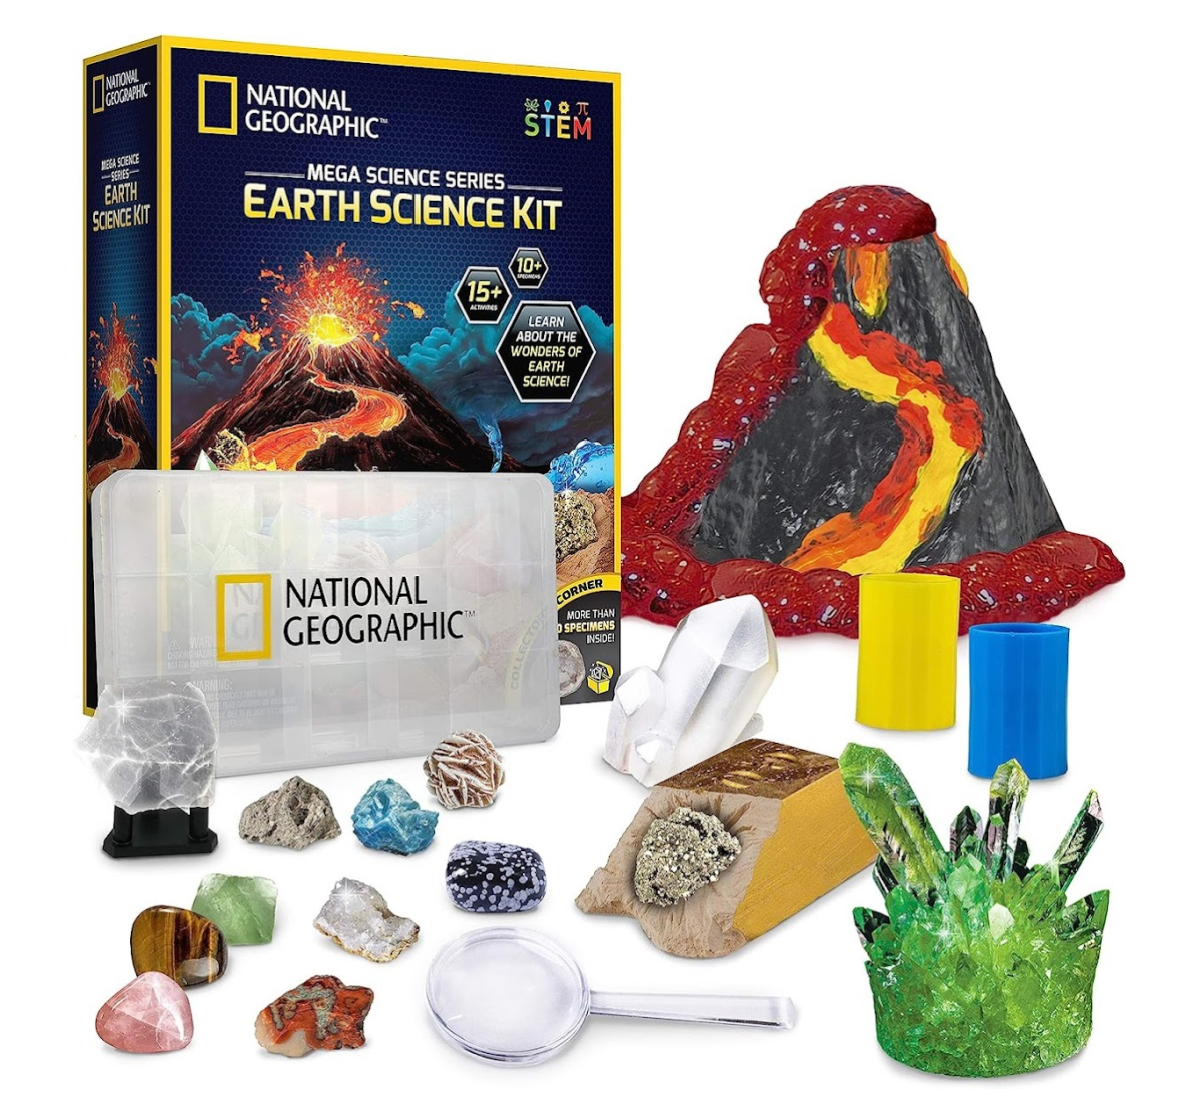 The National Geographic Earth Science Kit that made Amazon's Toys We Love List for 2023